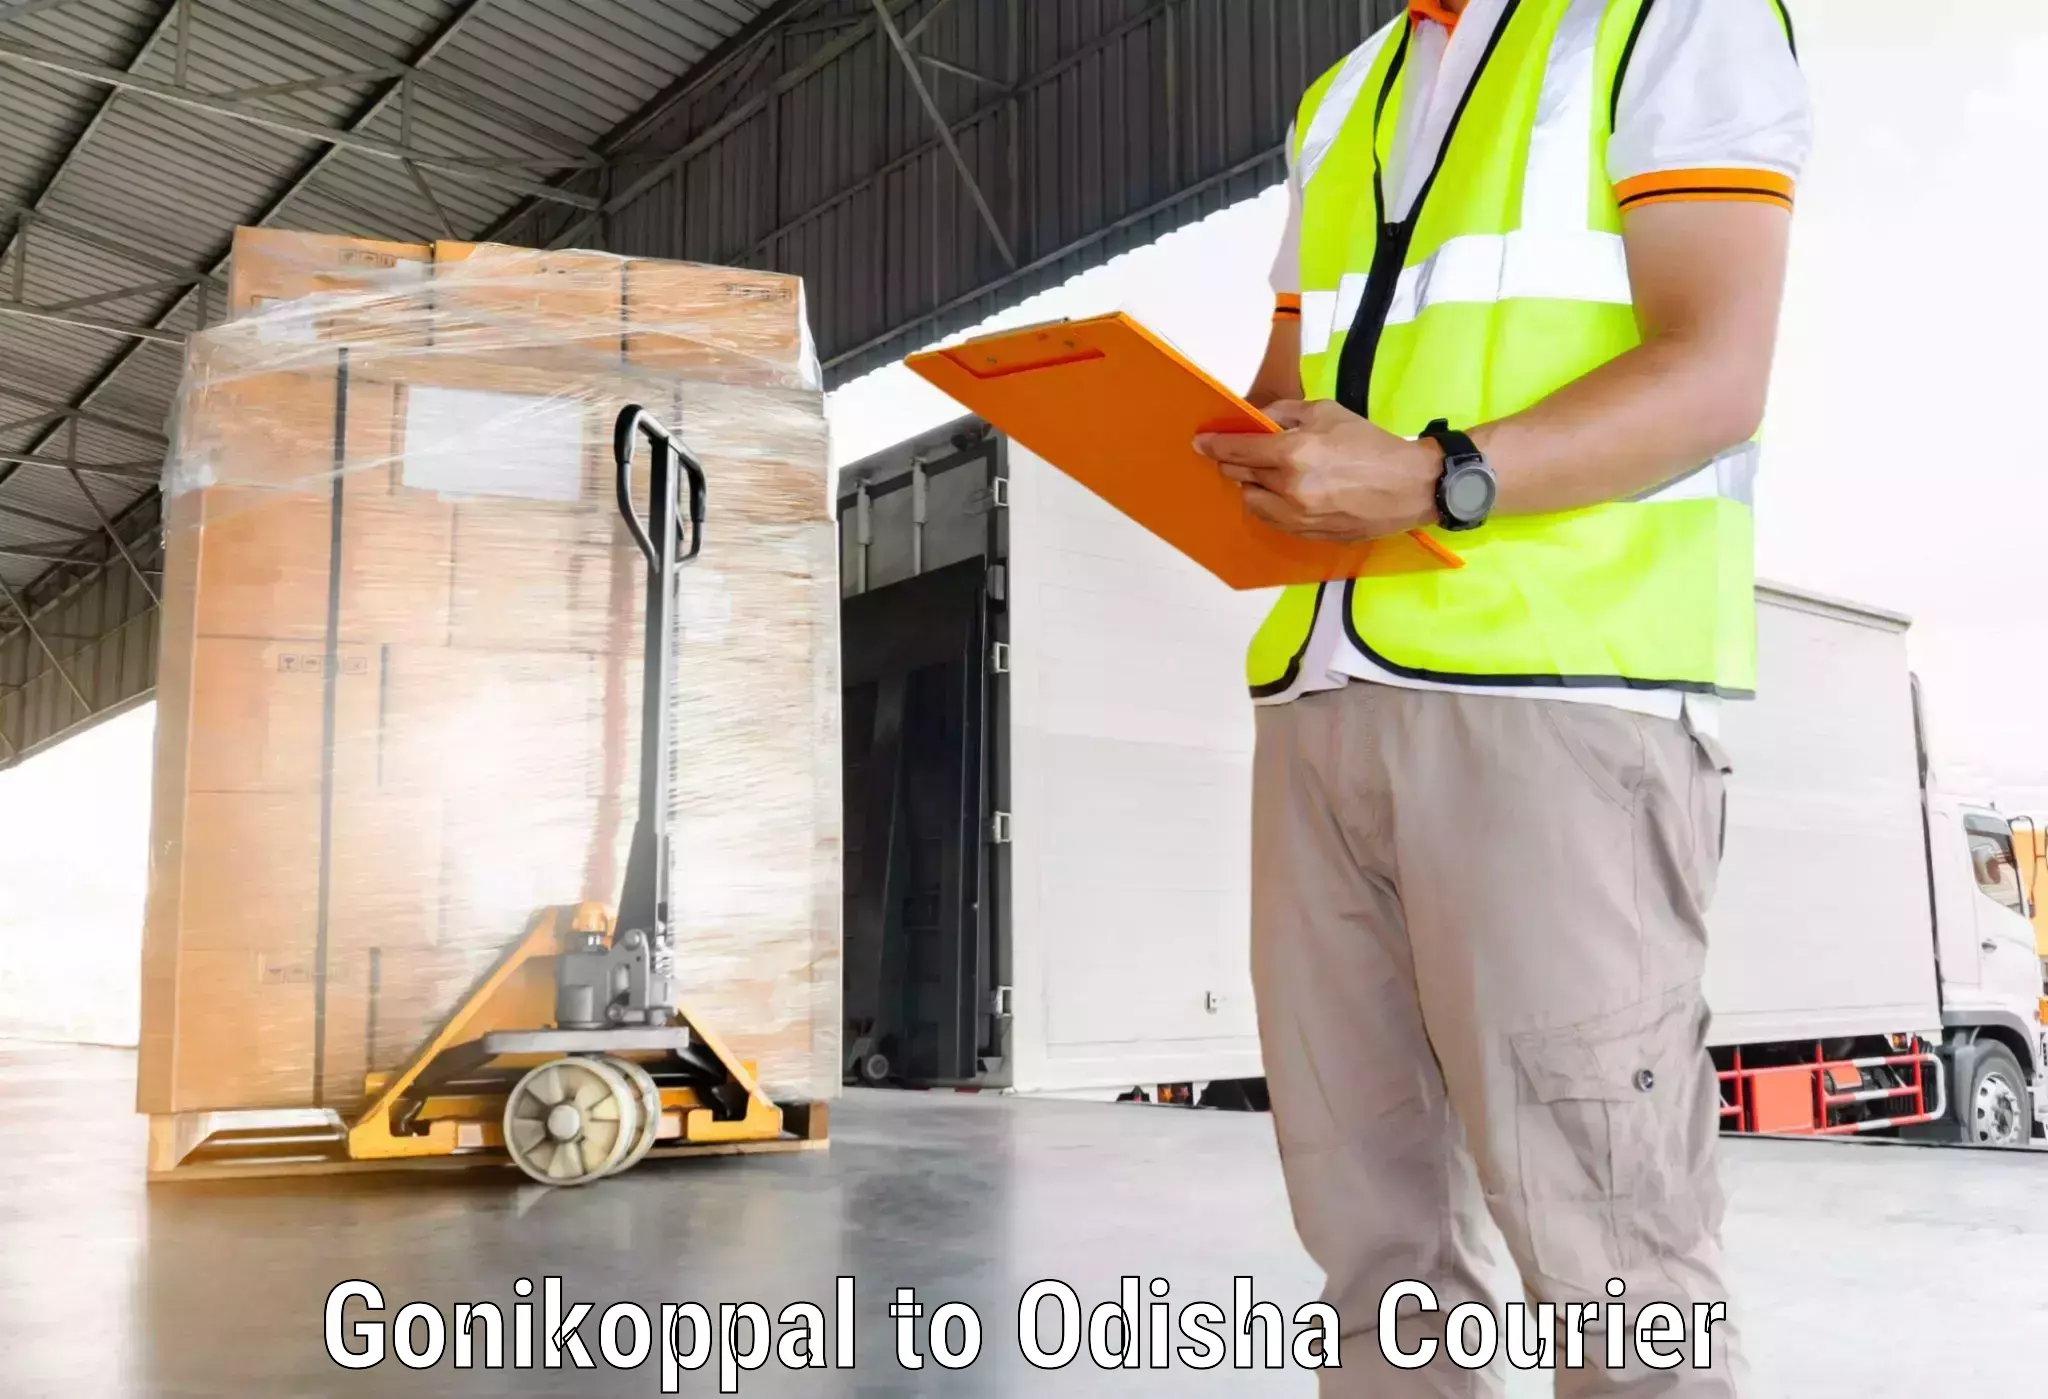 Advanced shipping technology Gonikoppal to Galleri